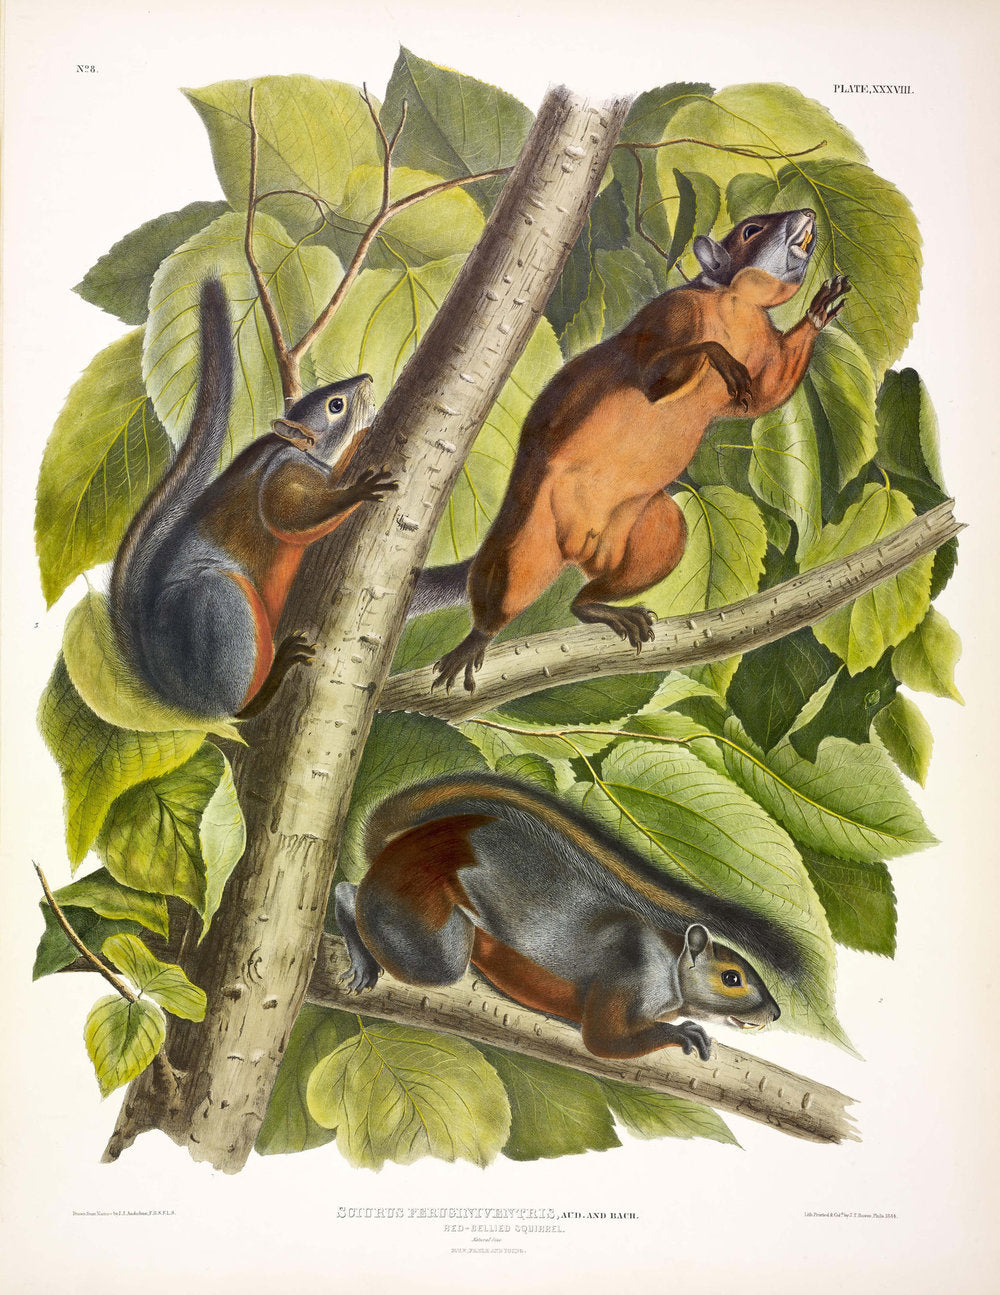 Painted by John James Audubon (1785-1851) with background likely by Victor Gifford Audubon (1809-1860)  Plate XXXVIII - Red-bellied Squirrel  From: Viviparous Quadrupeds of North America  New York: 1845-1848  Hand colored lithograph  Sheet size: 21 ¼” x 27”